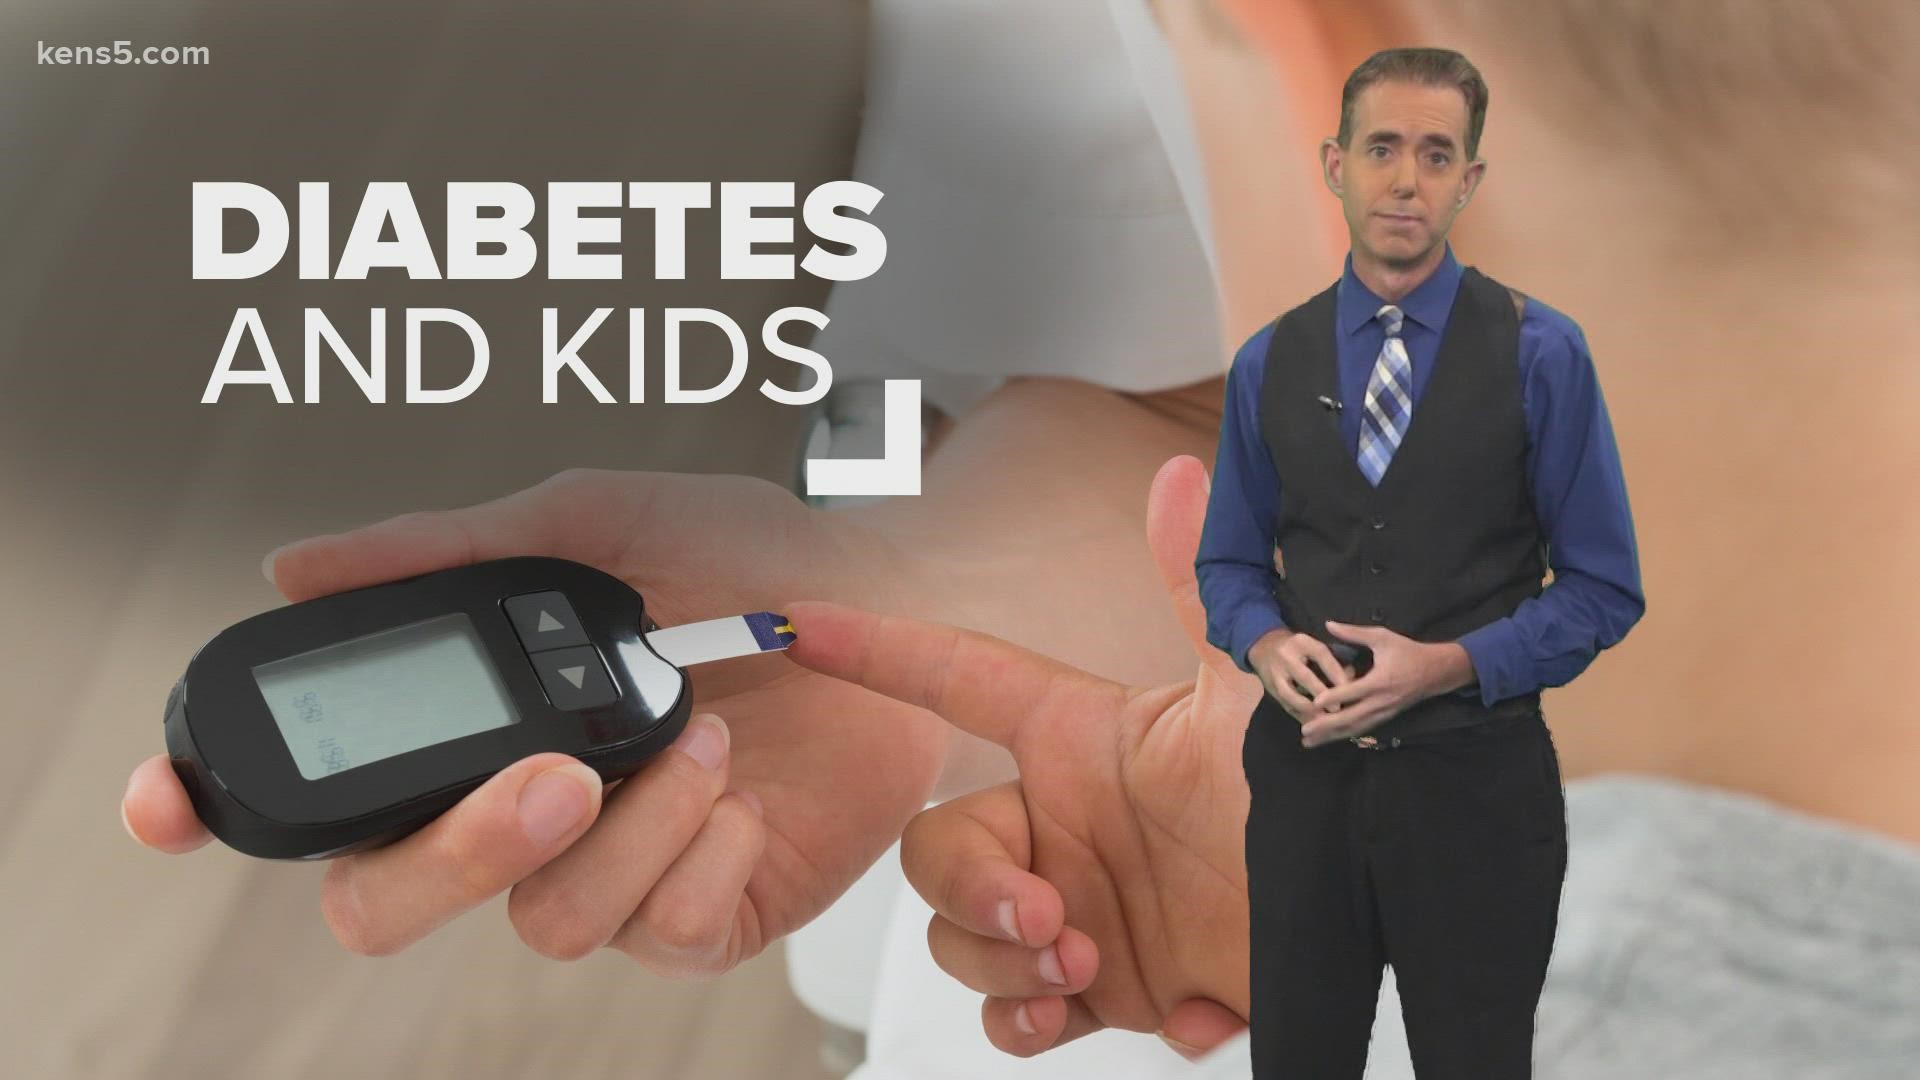 More kids are coming down with either Type 1 or Type 2 diabetes. That's according to several recent studies.